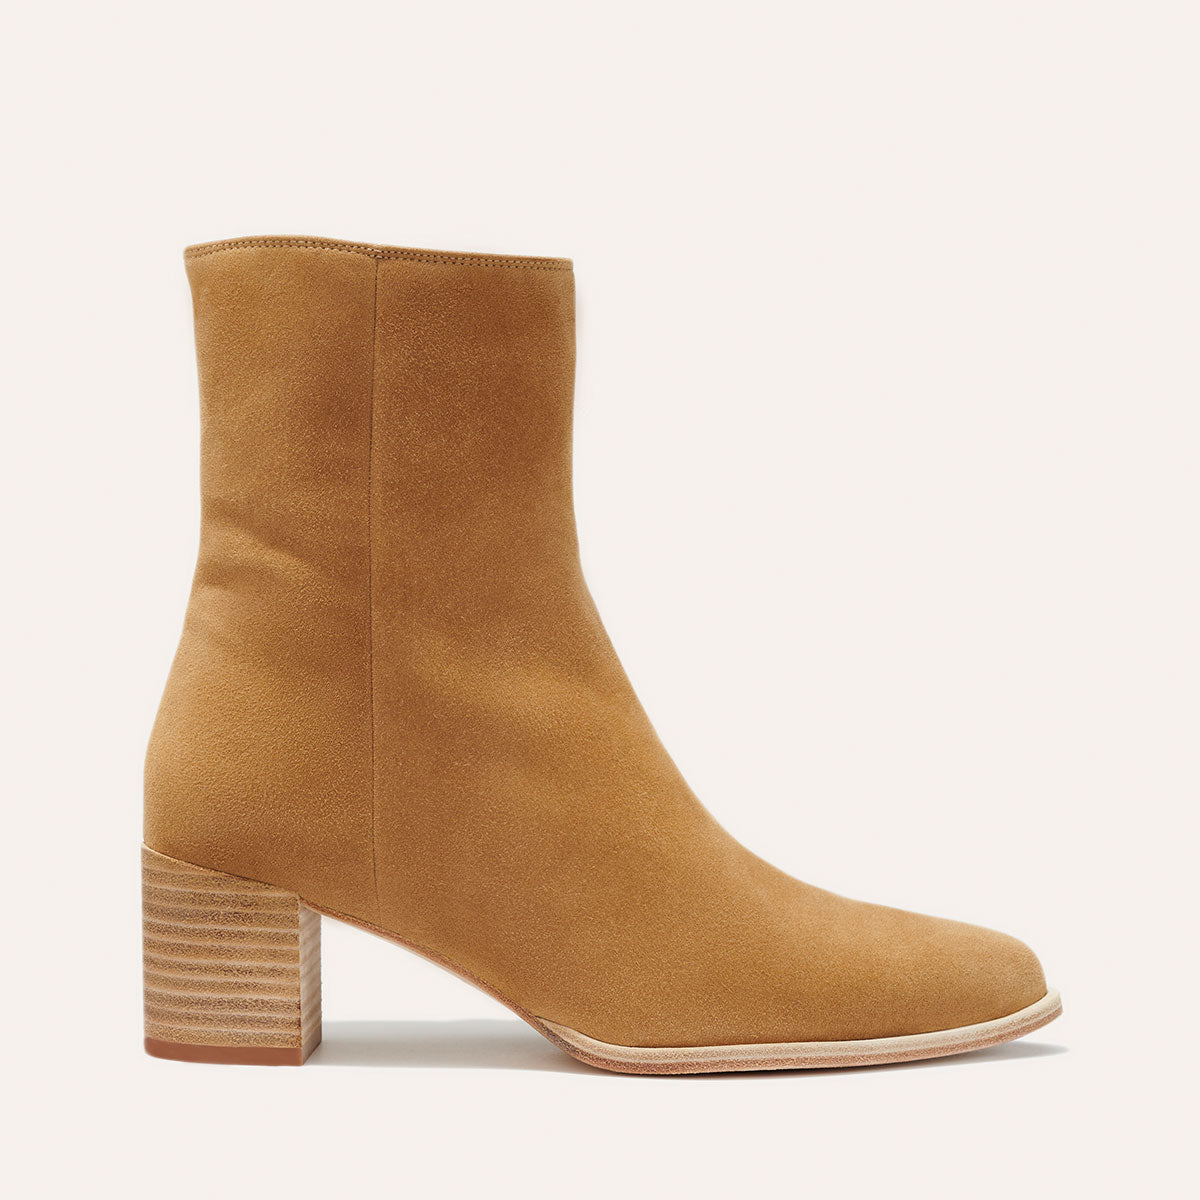 Margaux's classic Downtown Boot in beige suede with a comfortable block heel and pointed toe